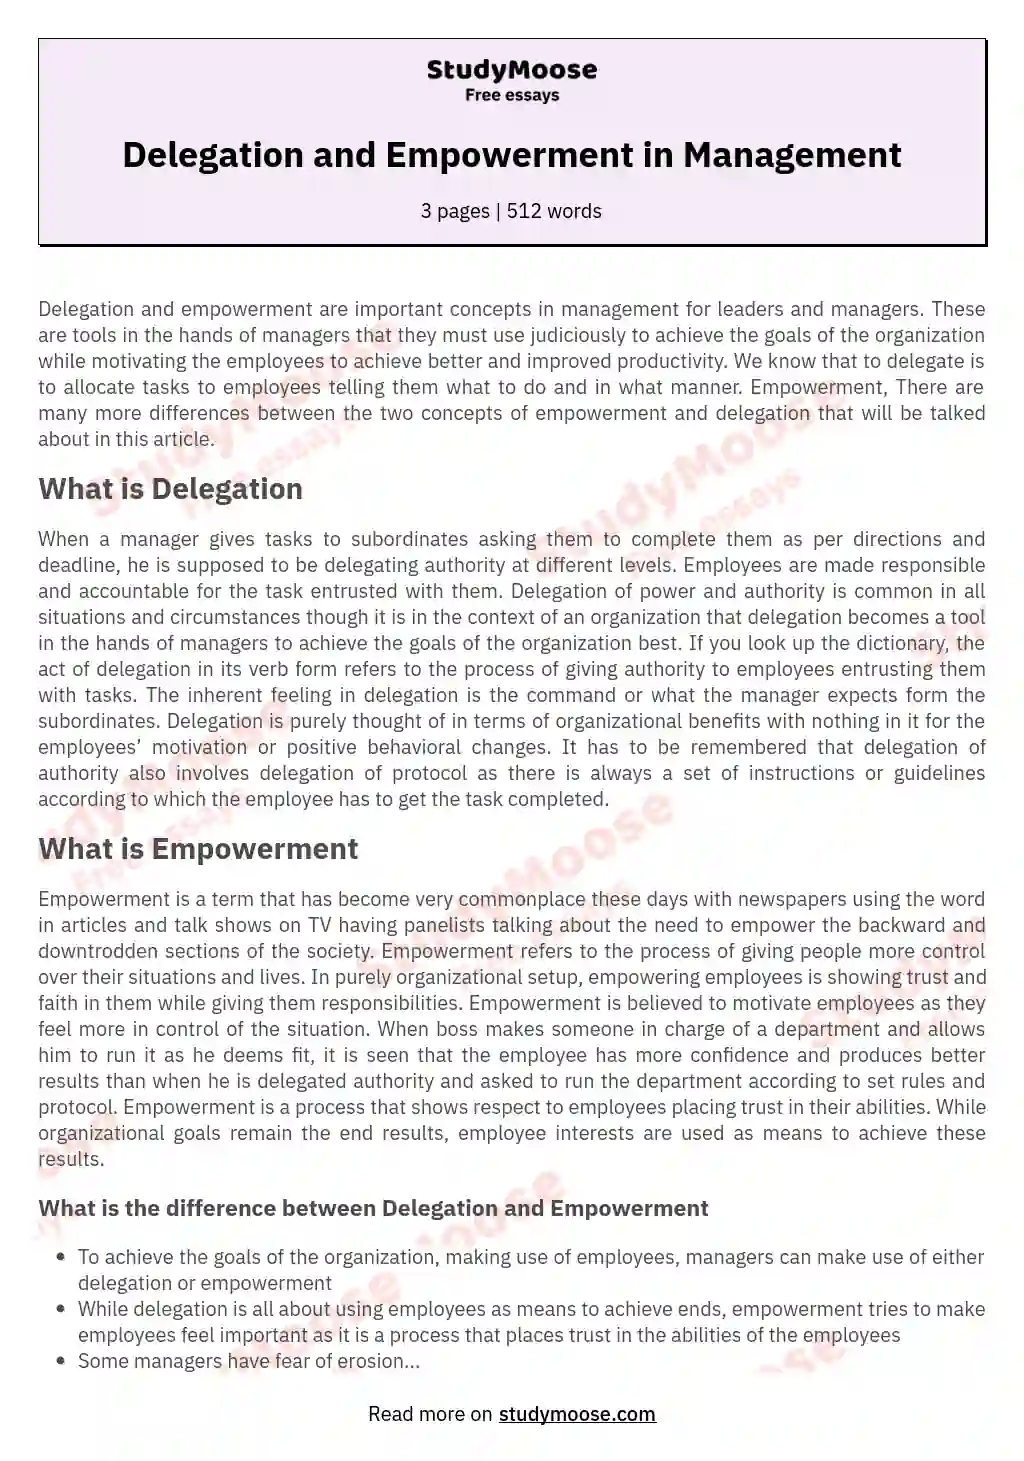 Delegation and Empowerment in Management essay